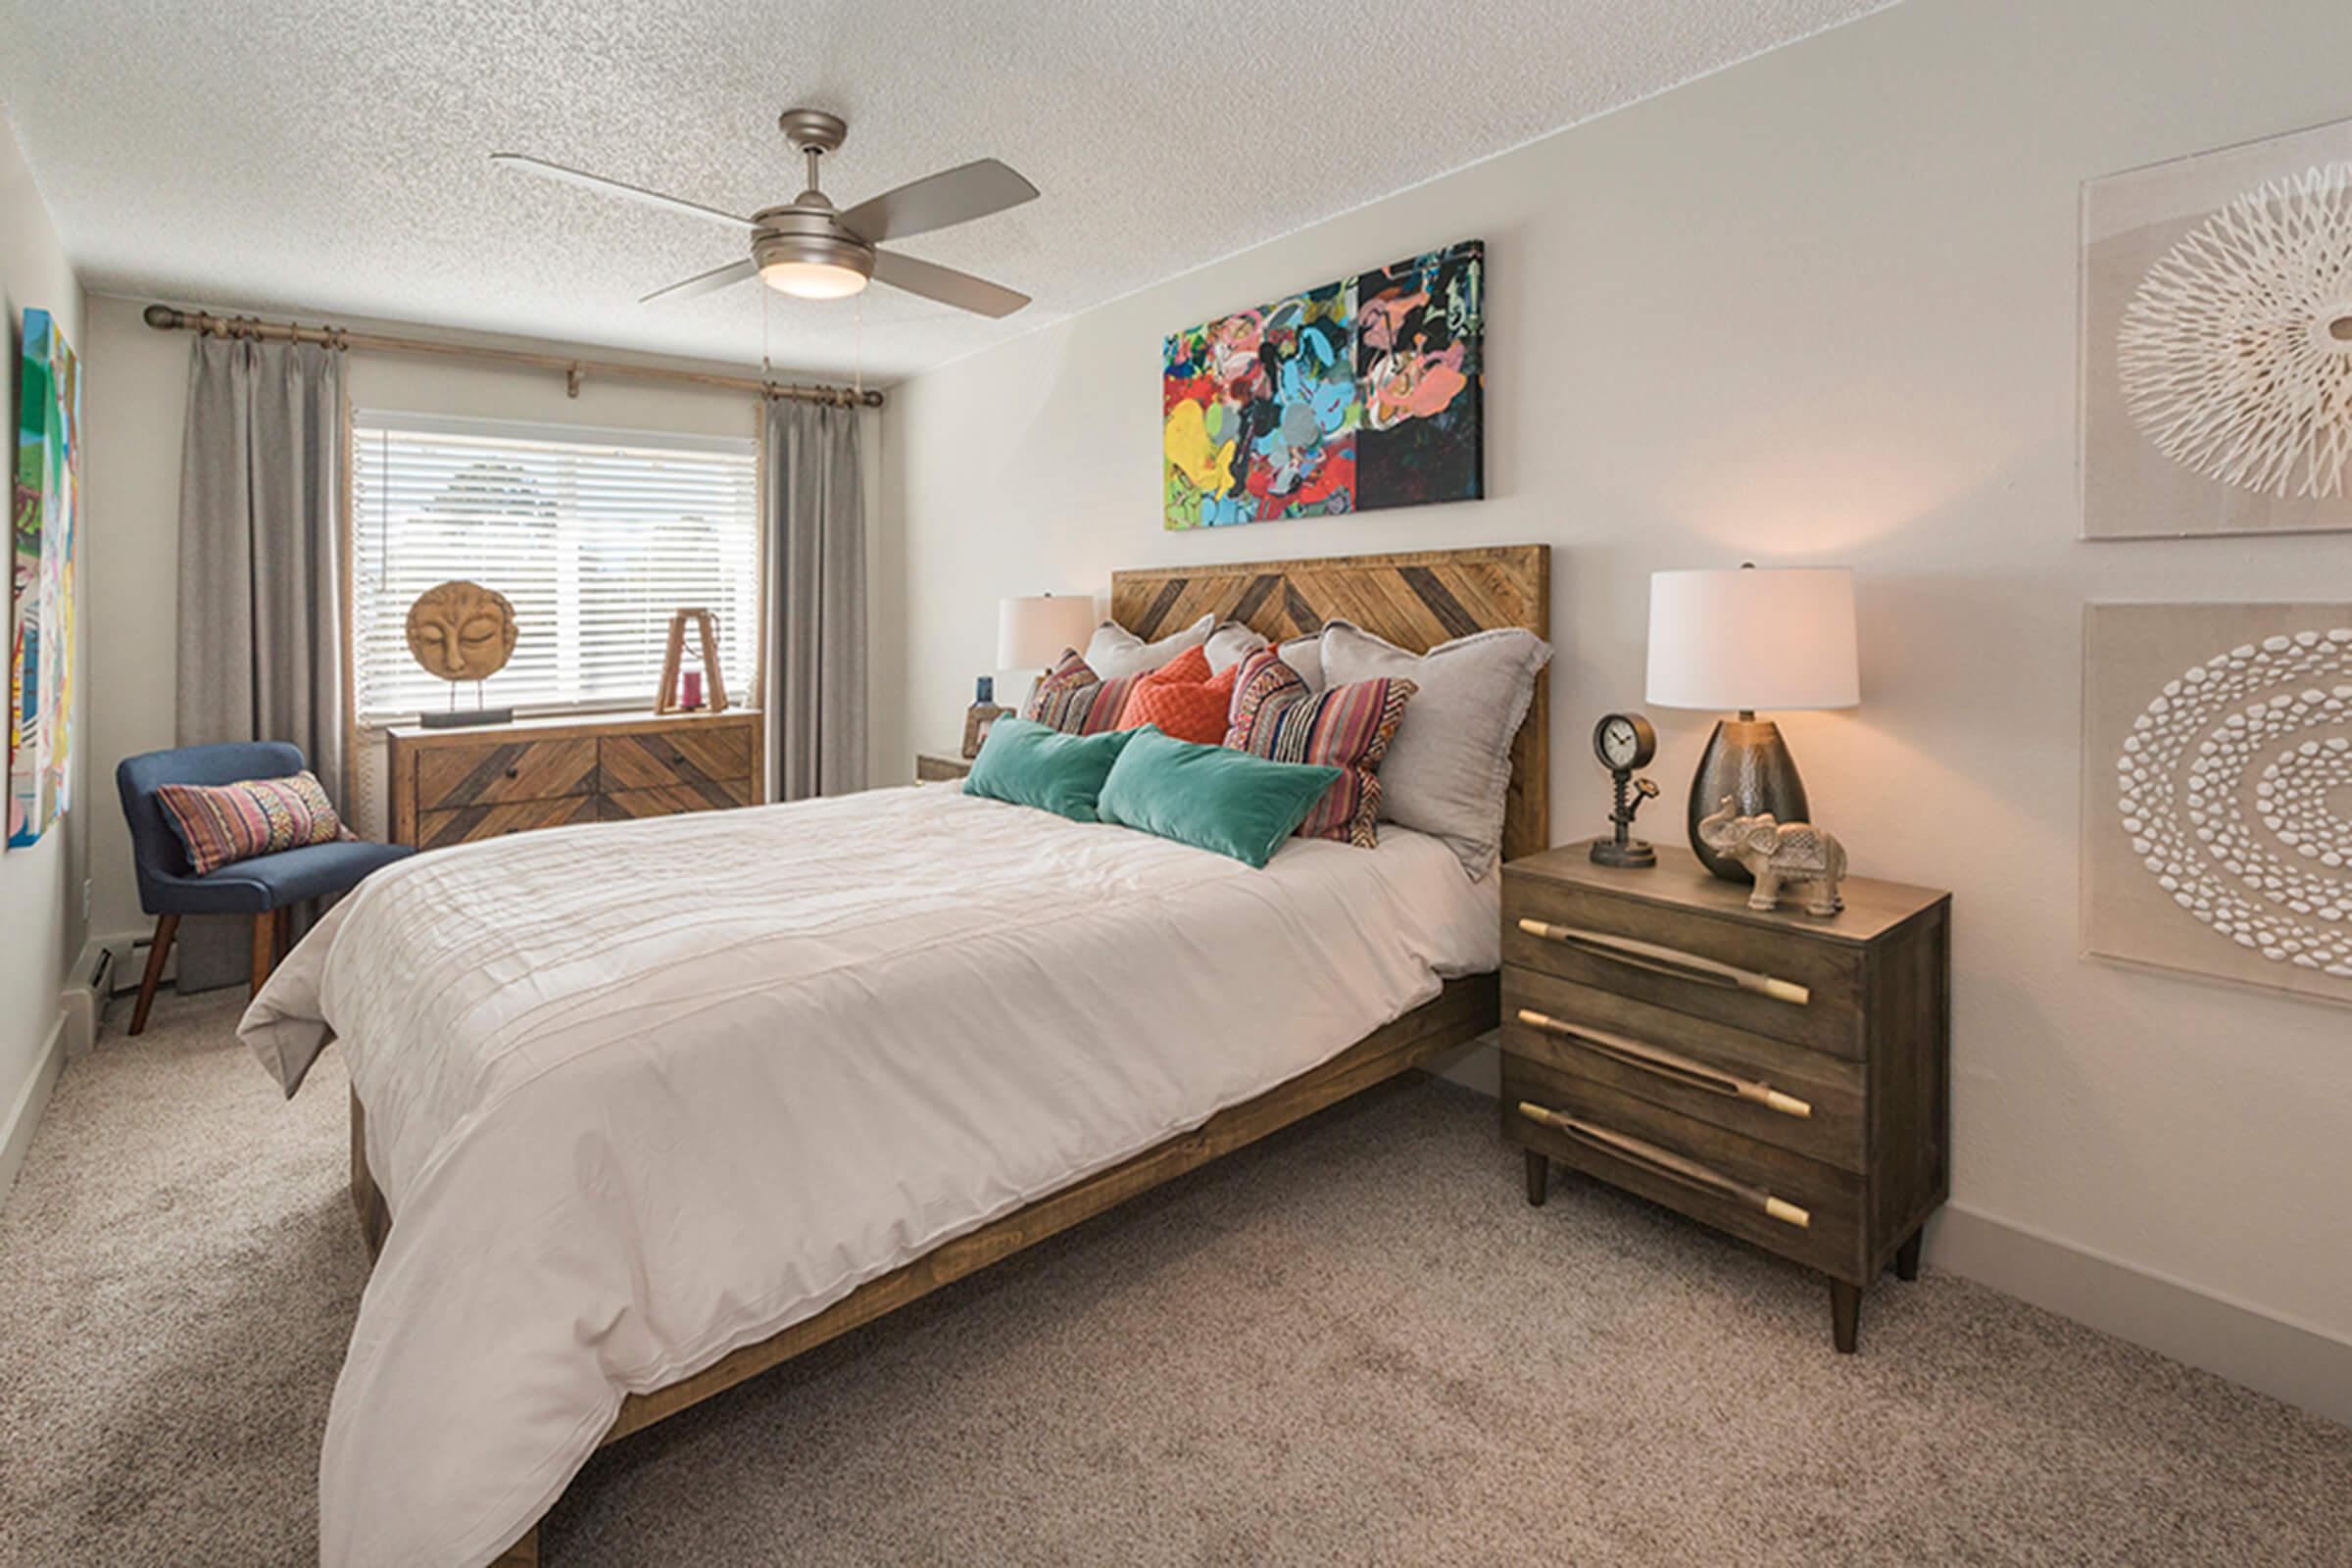 Second carpeted bedroom at North 49 Apartments, located in Colorado Springs, CO